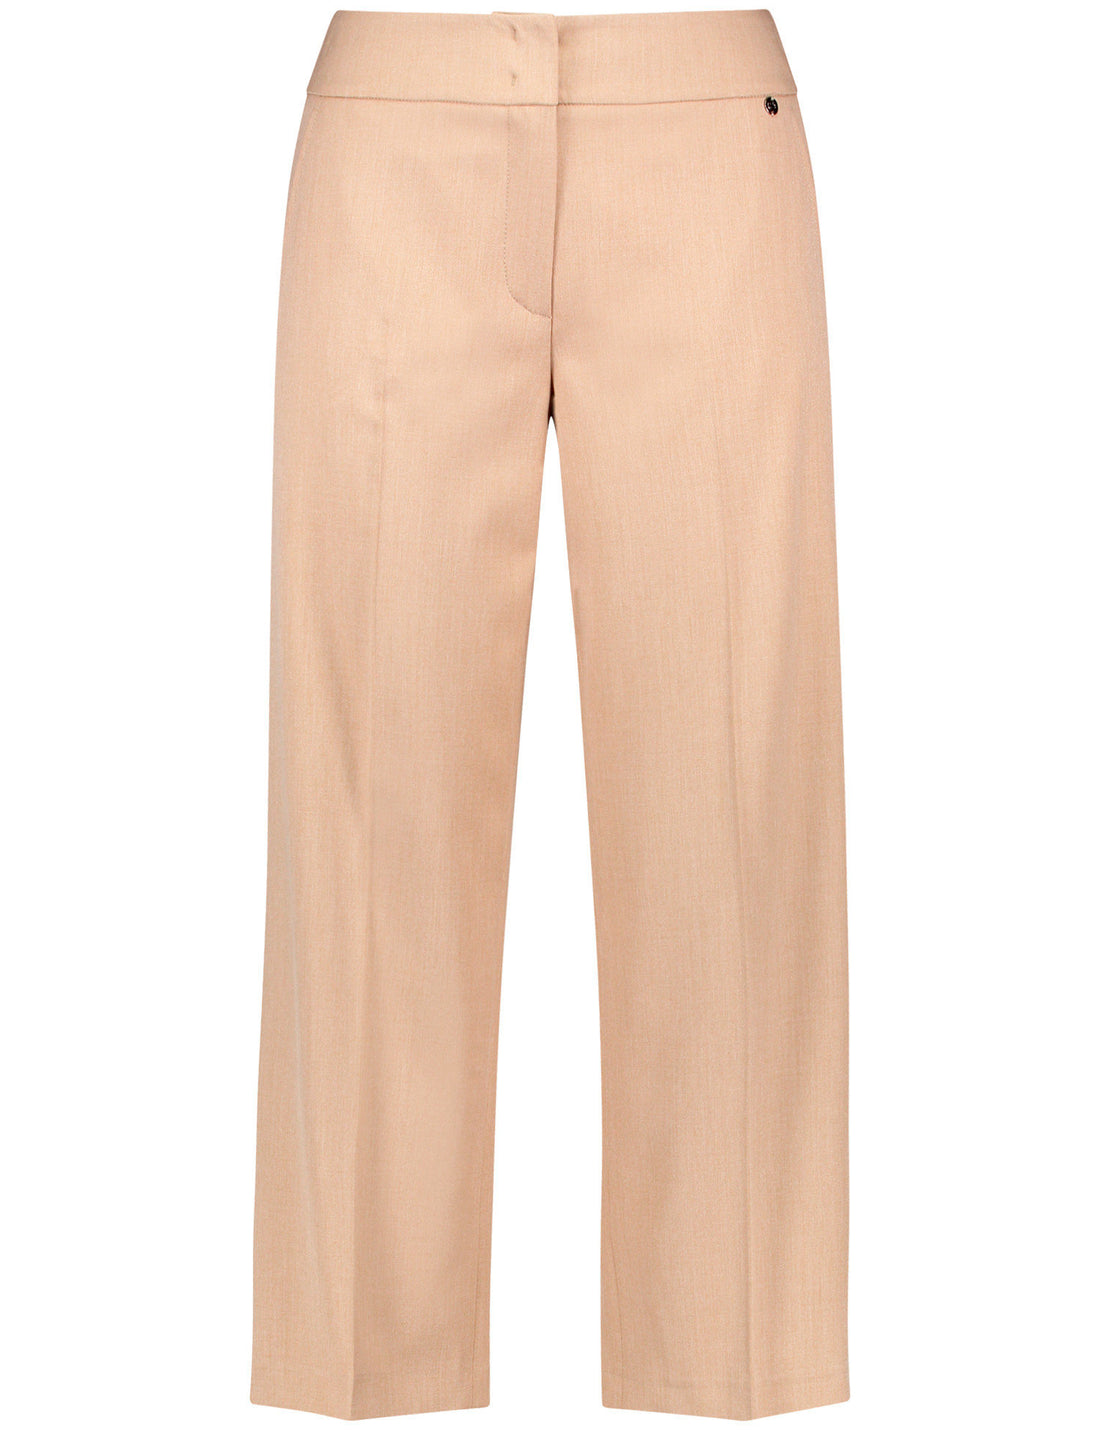 Chic Culottes With Added Stretch_122065-66337_905400_02